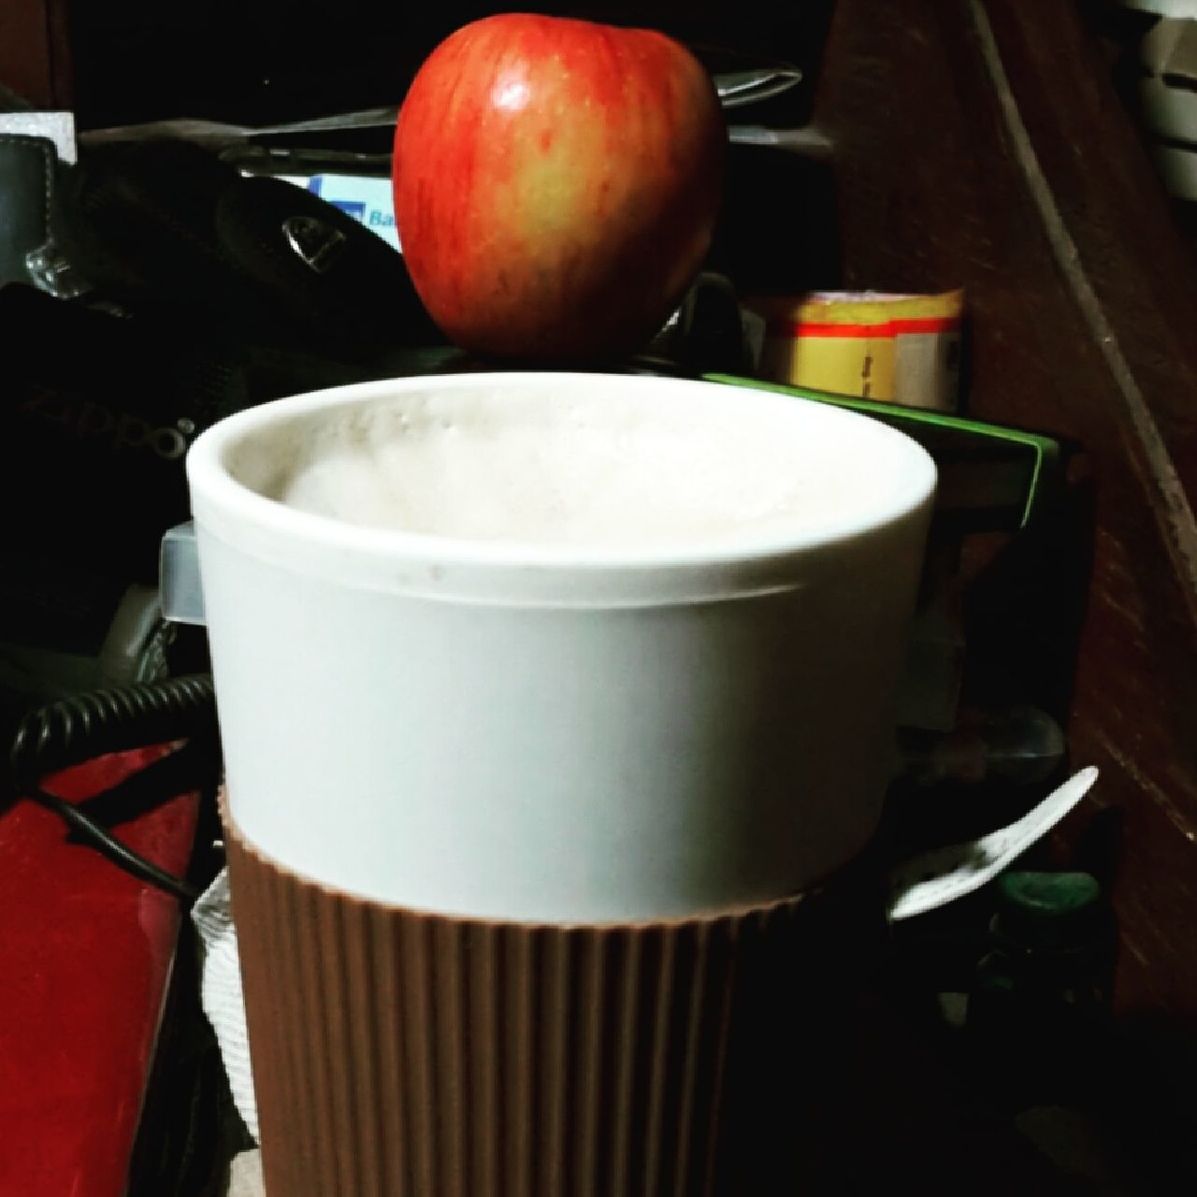 COFFEE CUP ON TABLE